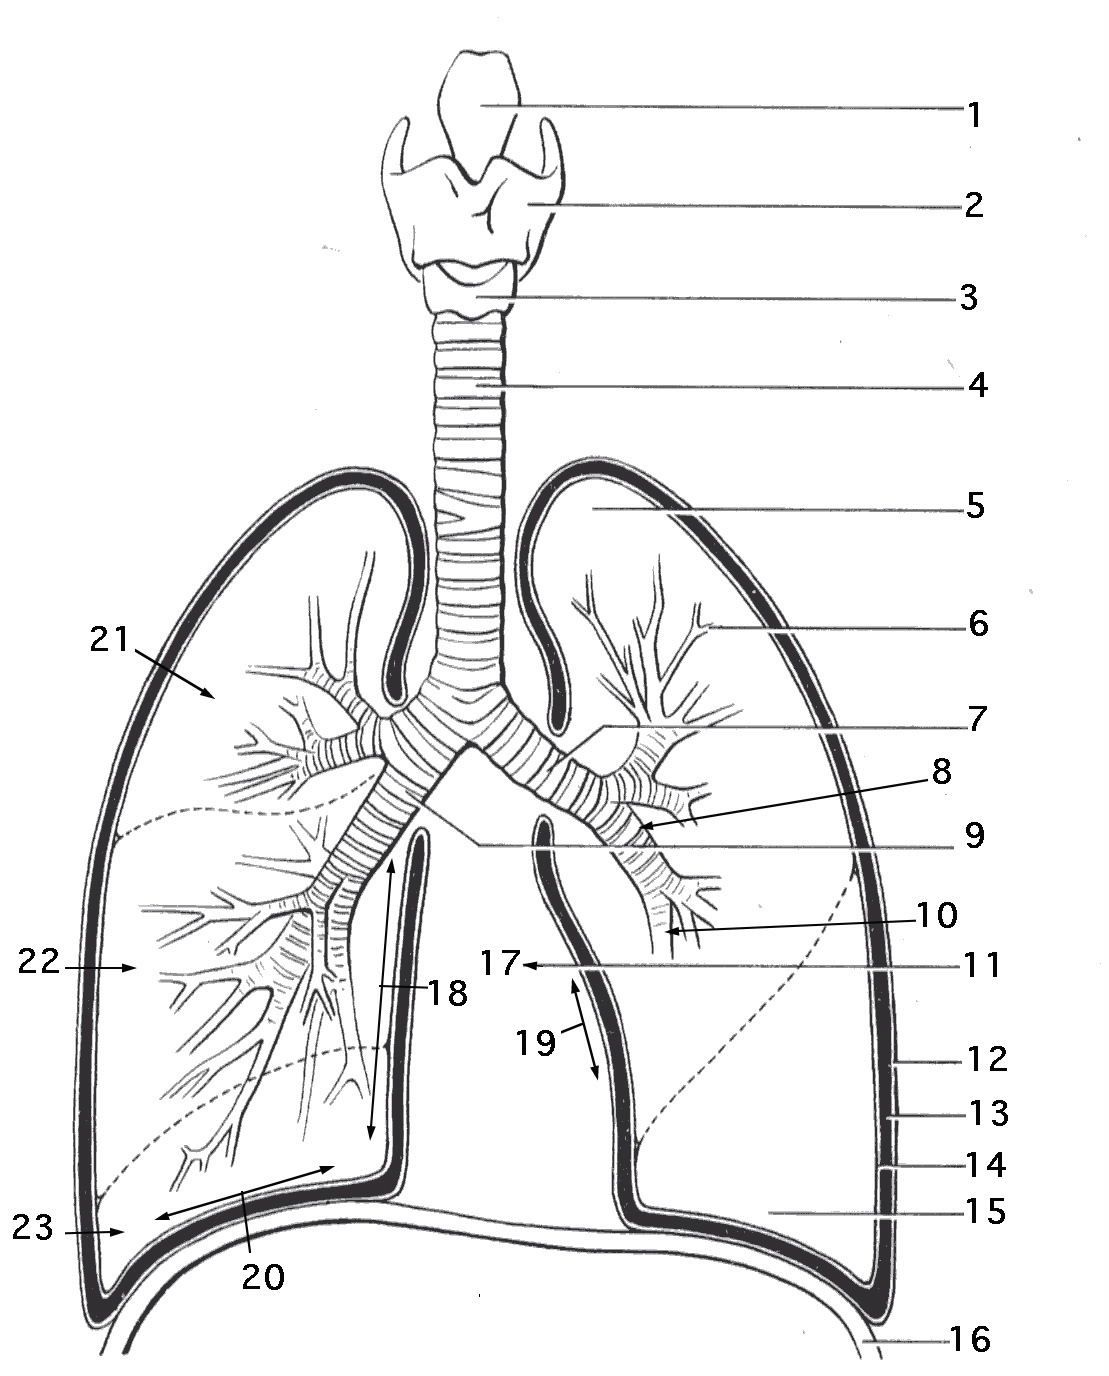 Lungs Respiratory System Coloring Page Work Sheet For Kids Throughout Respiratory System Worksheet Pdf